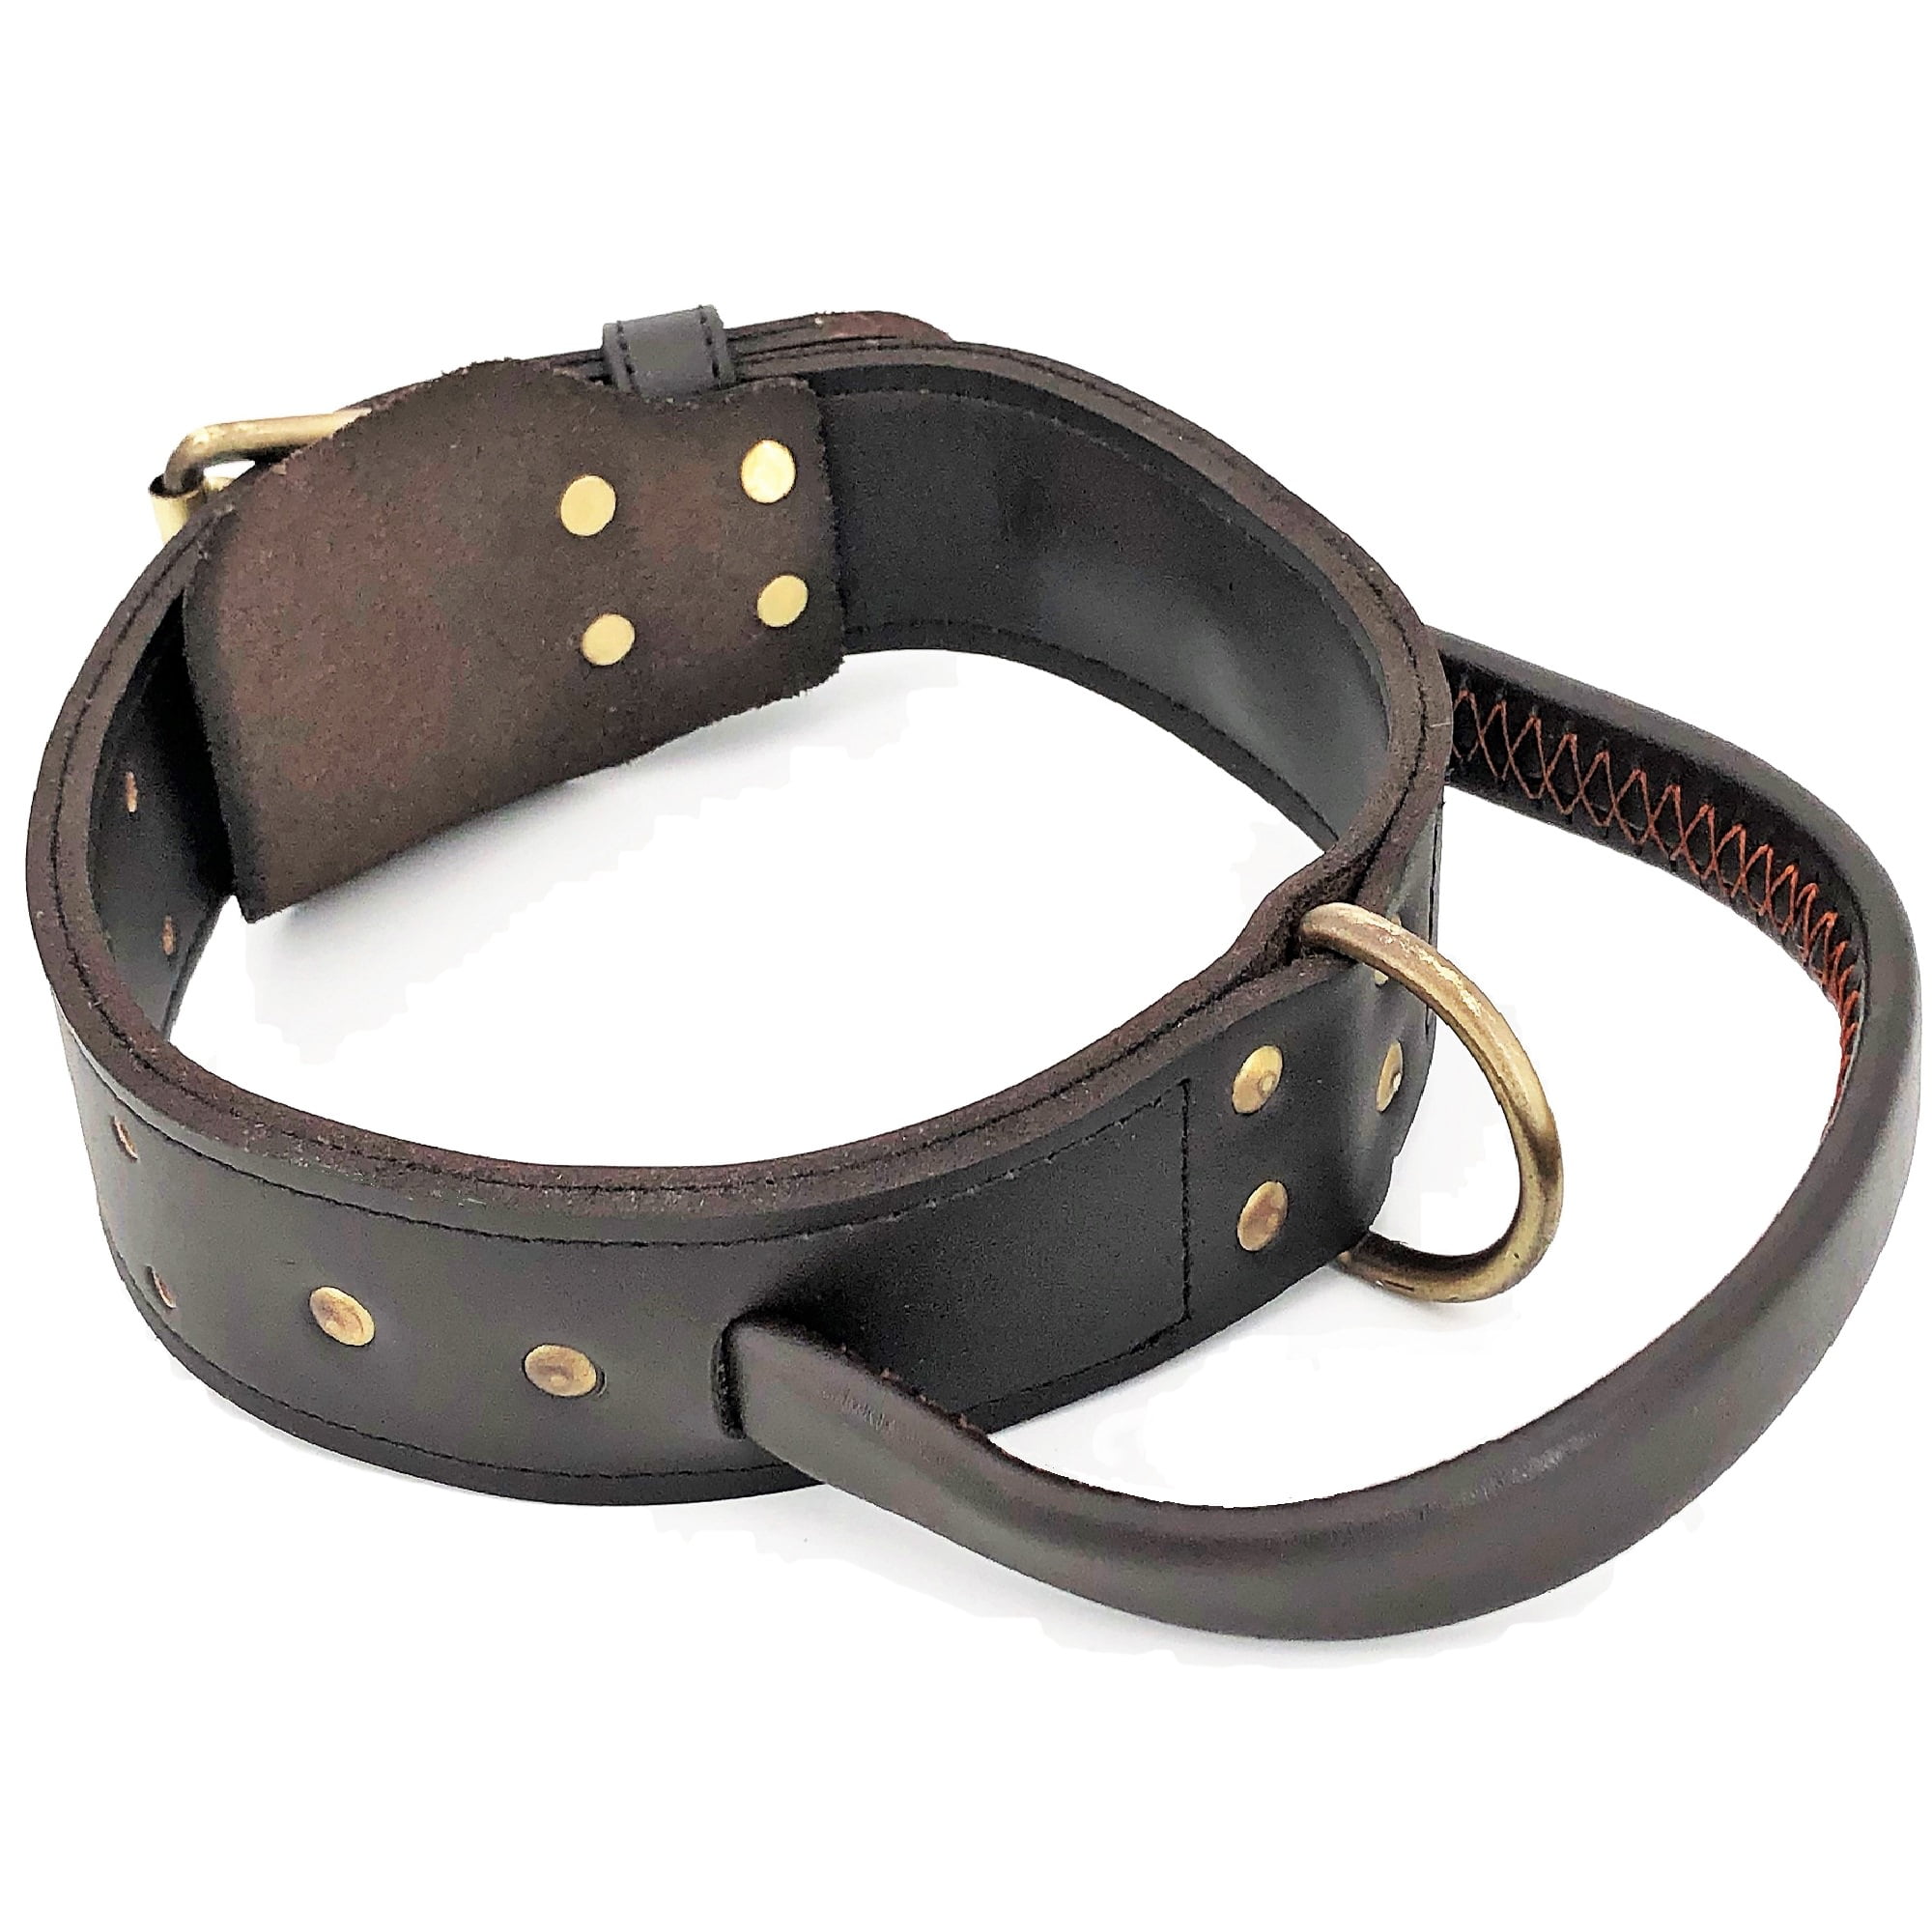 Genuine Leather Dog Collar 1" wide 15"-20" neck for Medium/Large Dogs 